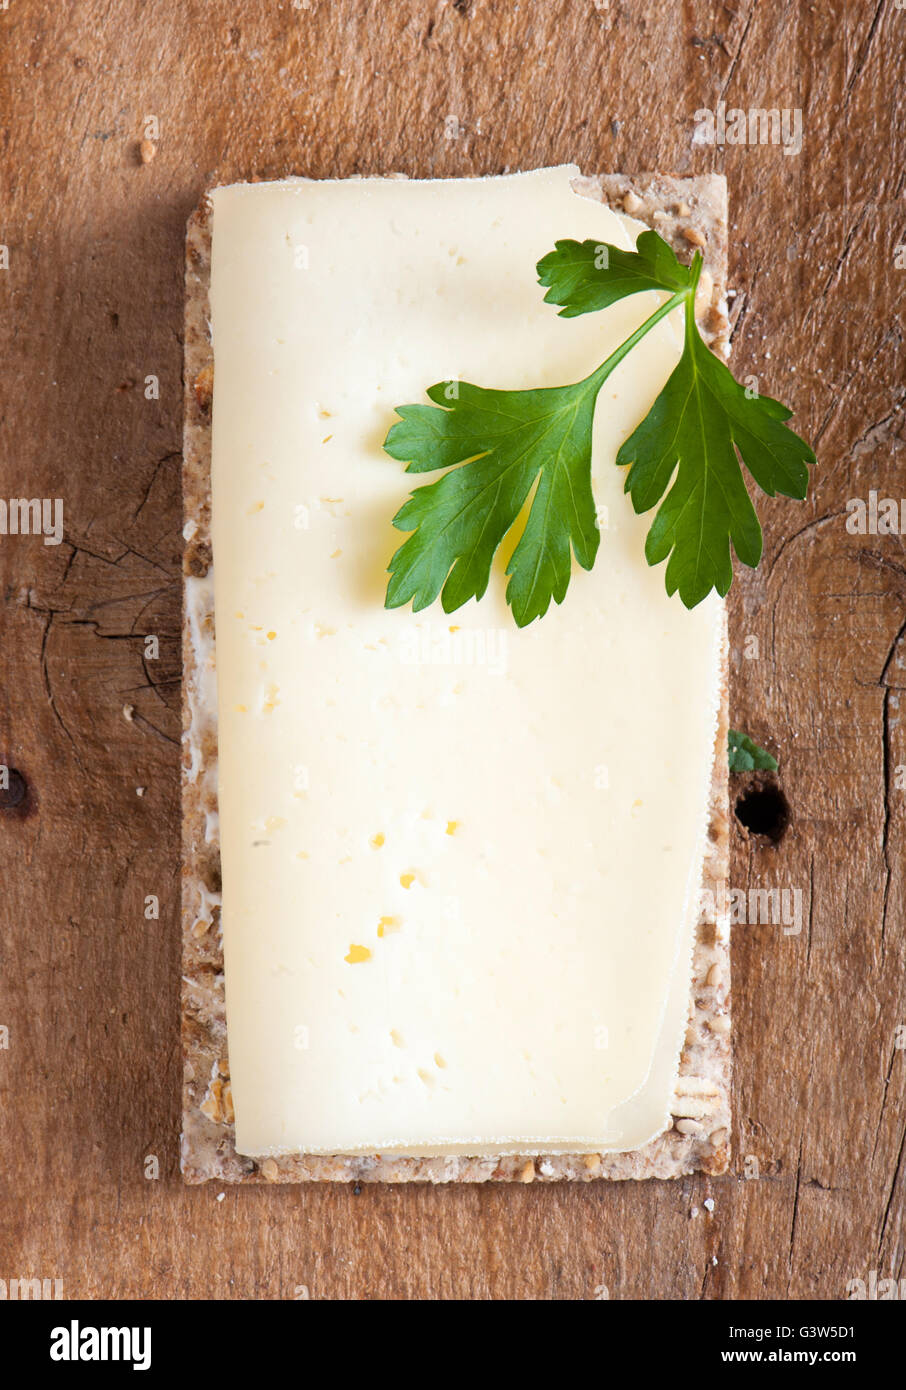 Crisp bread with fresh cheese and parsley Stock Photo